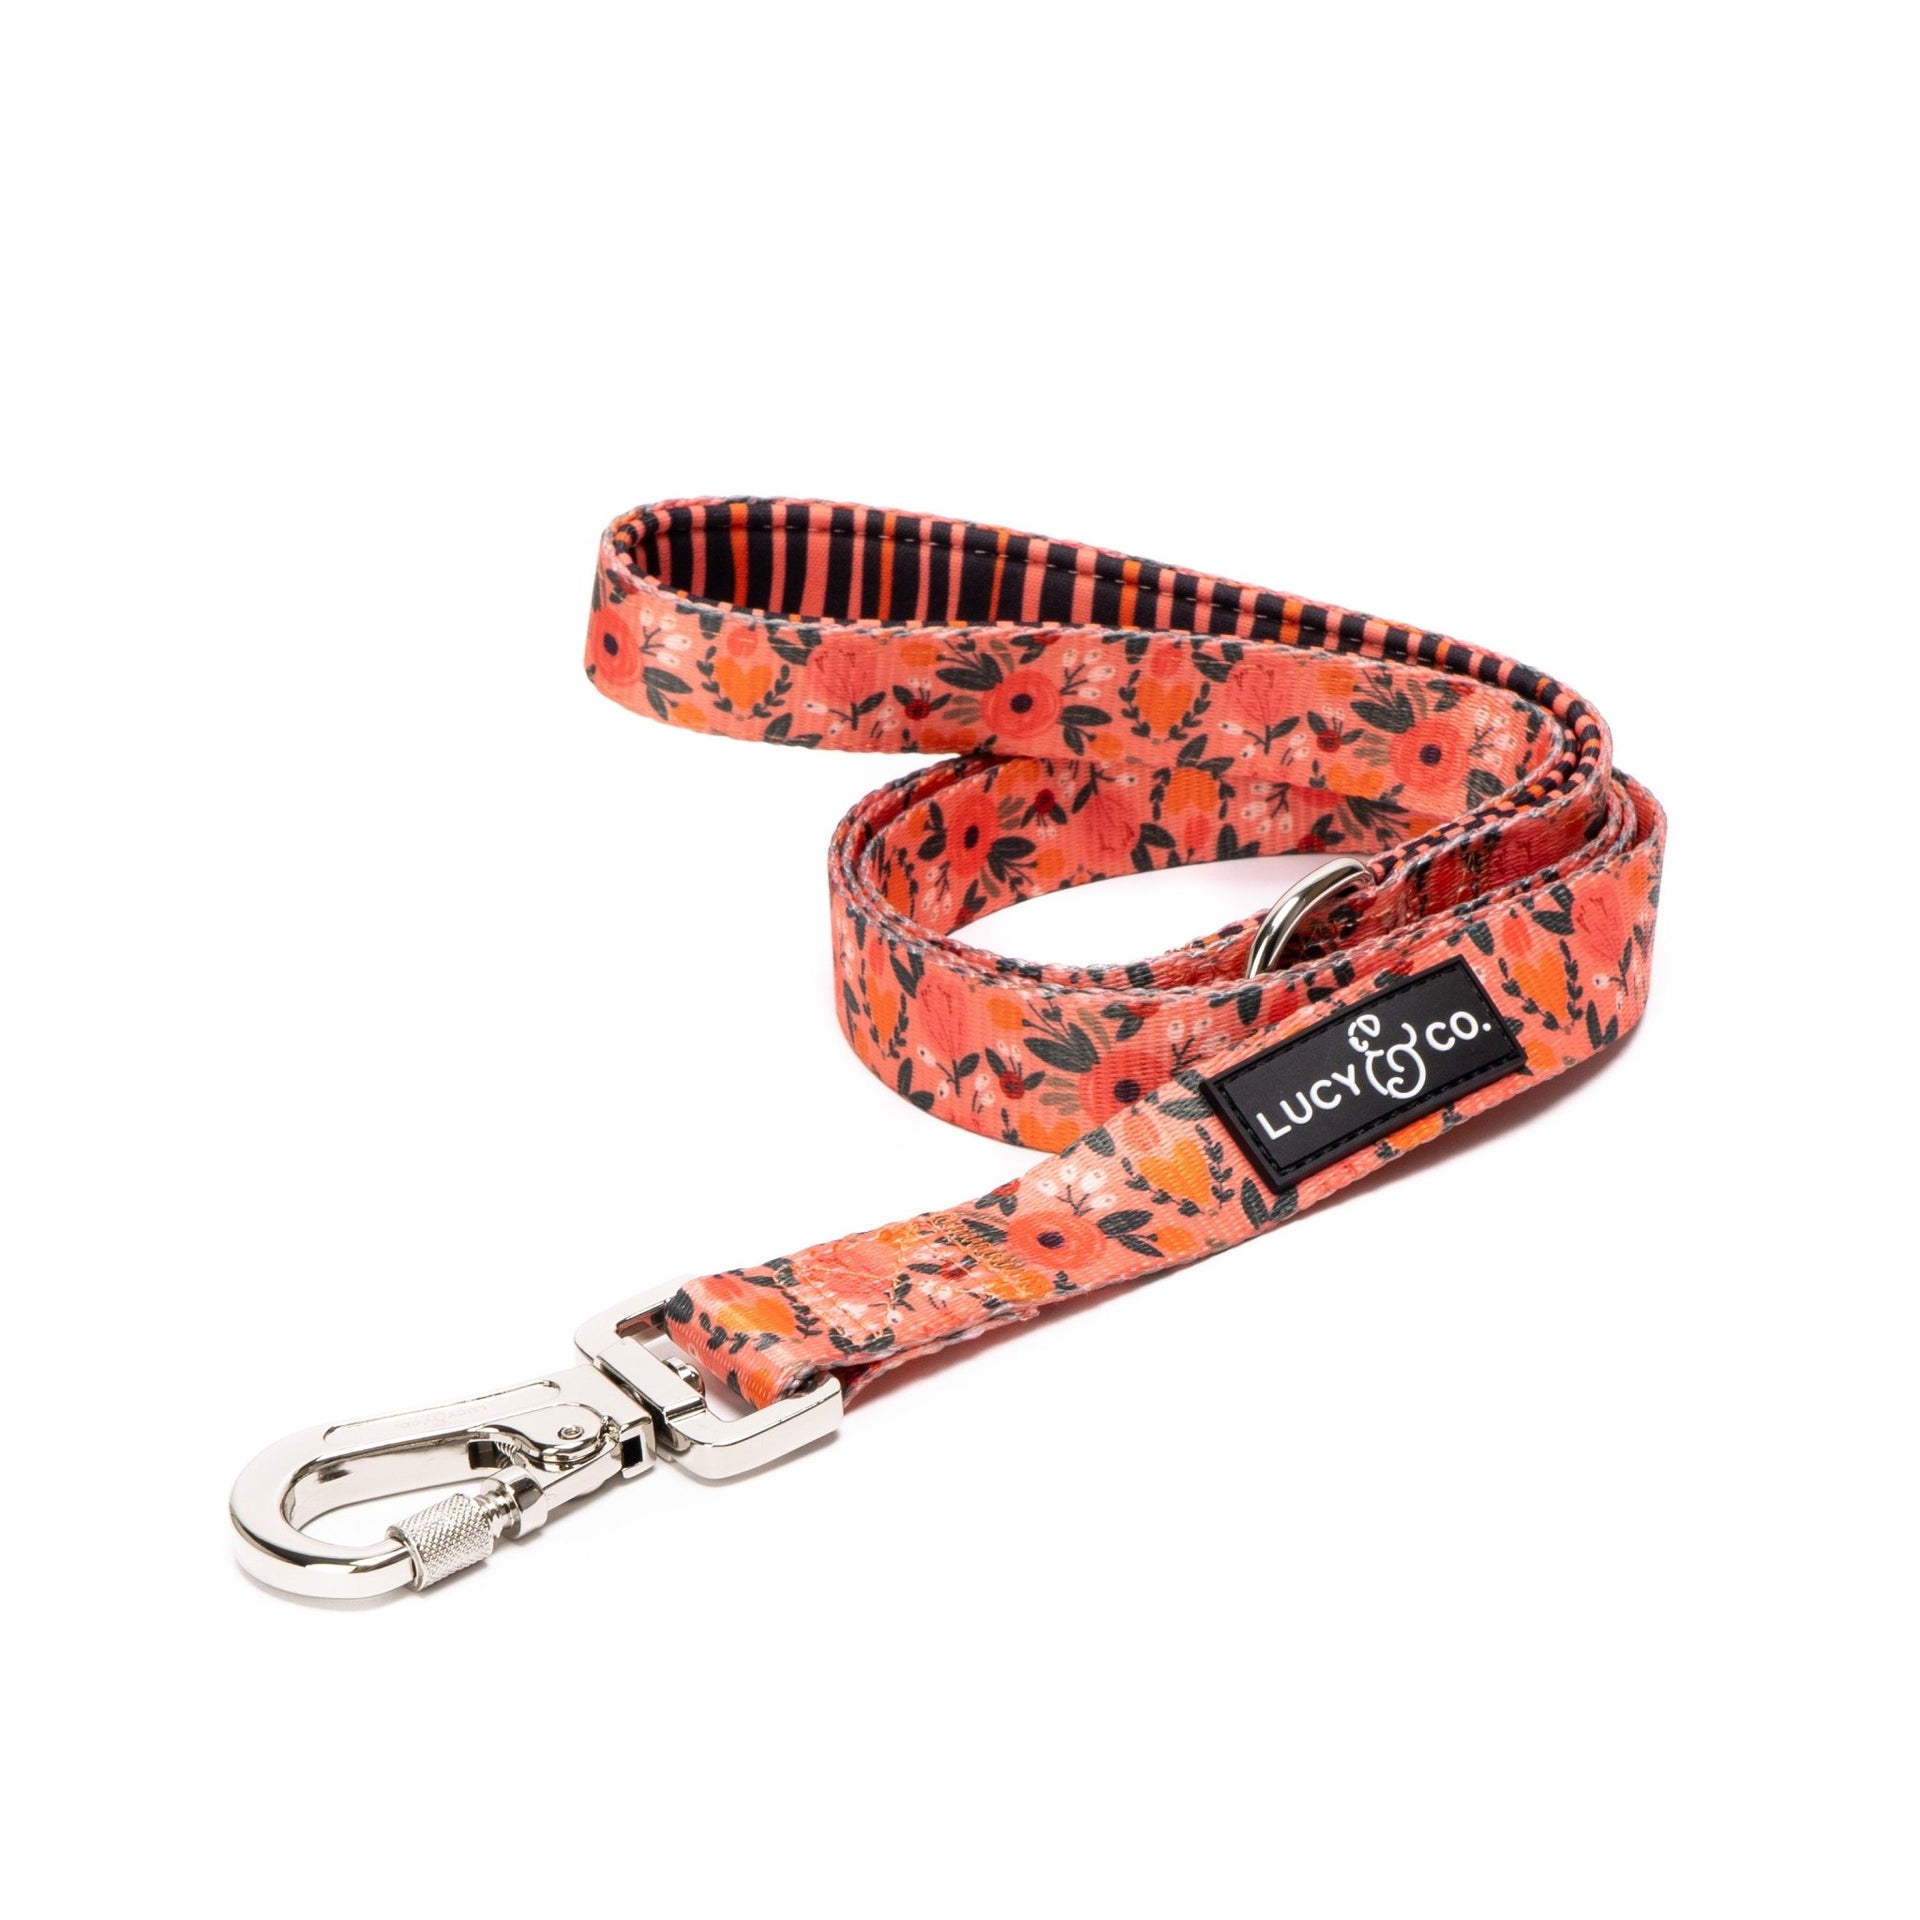 Lucy & Co. The in The Clouds Leash - Pink - S